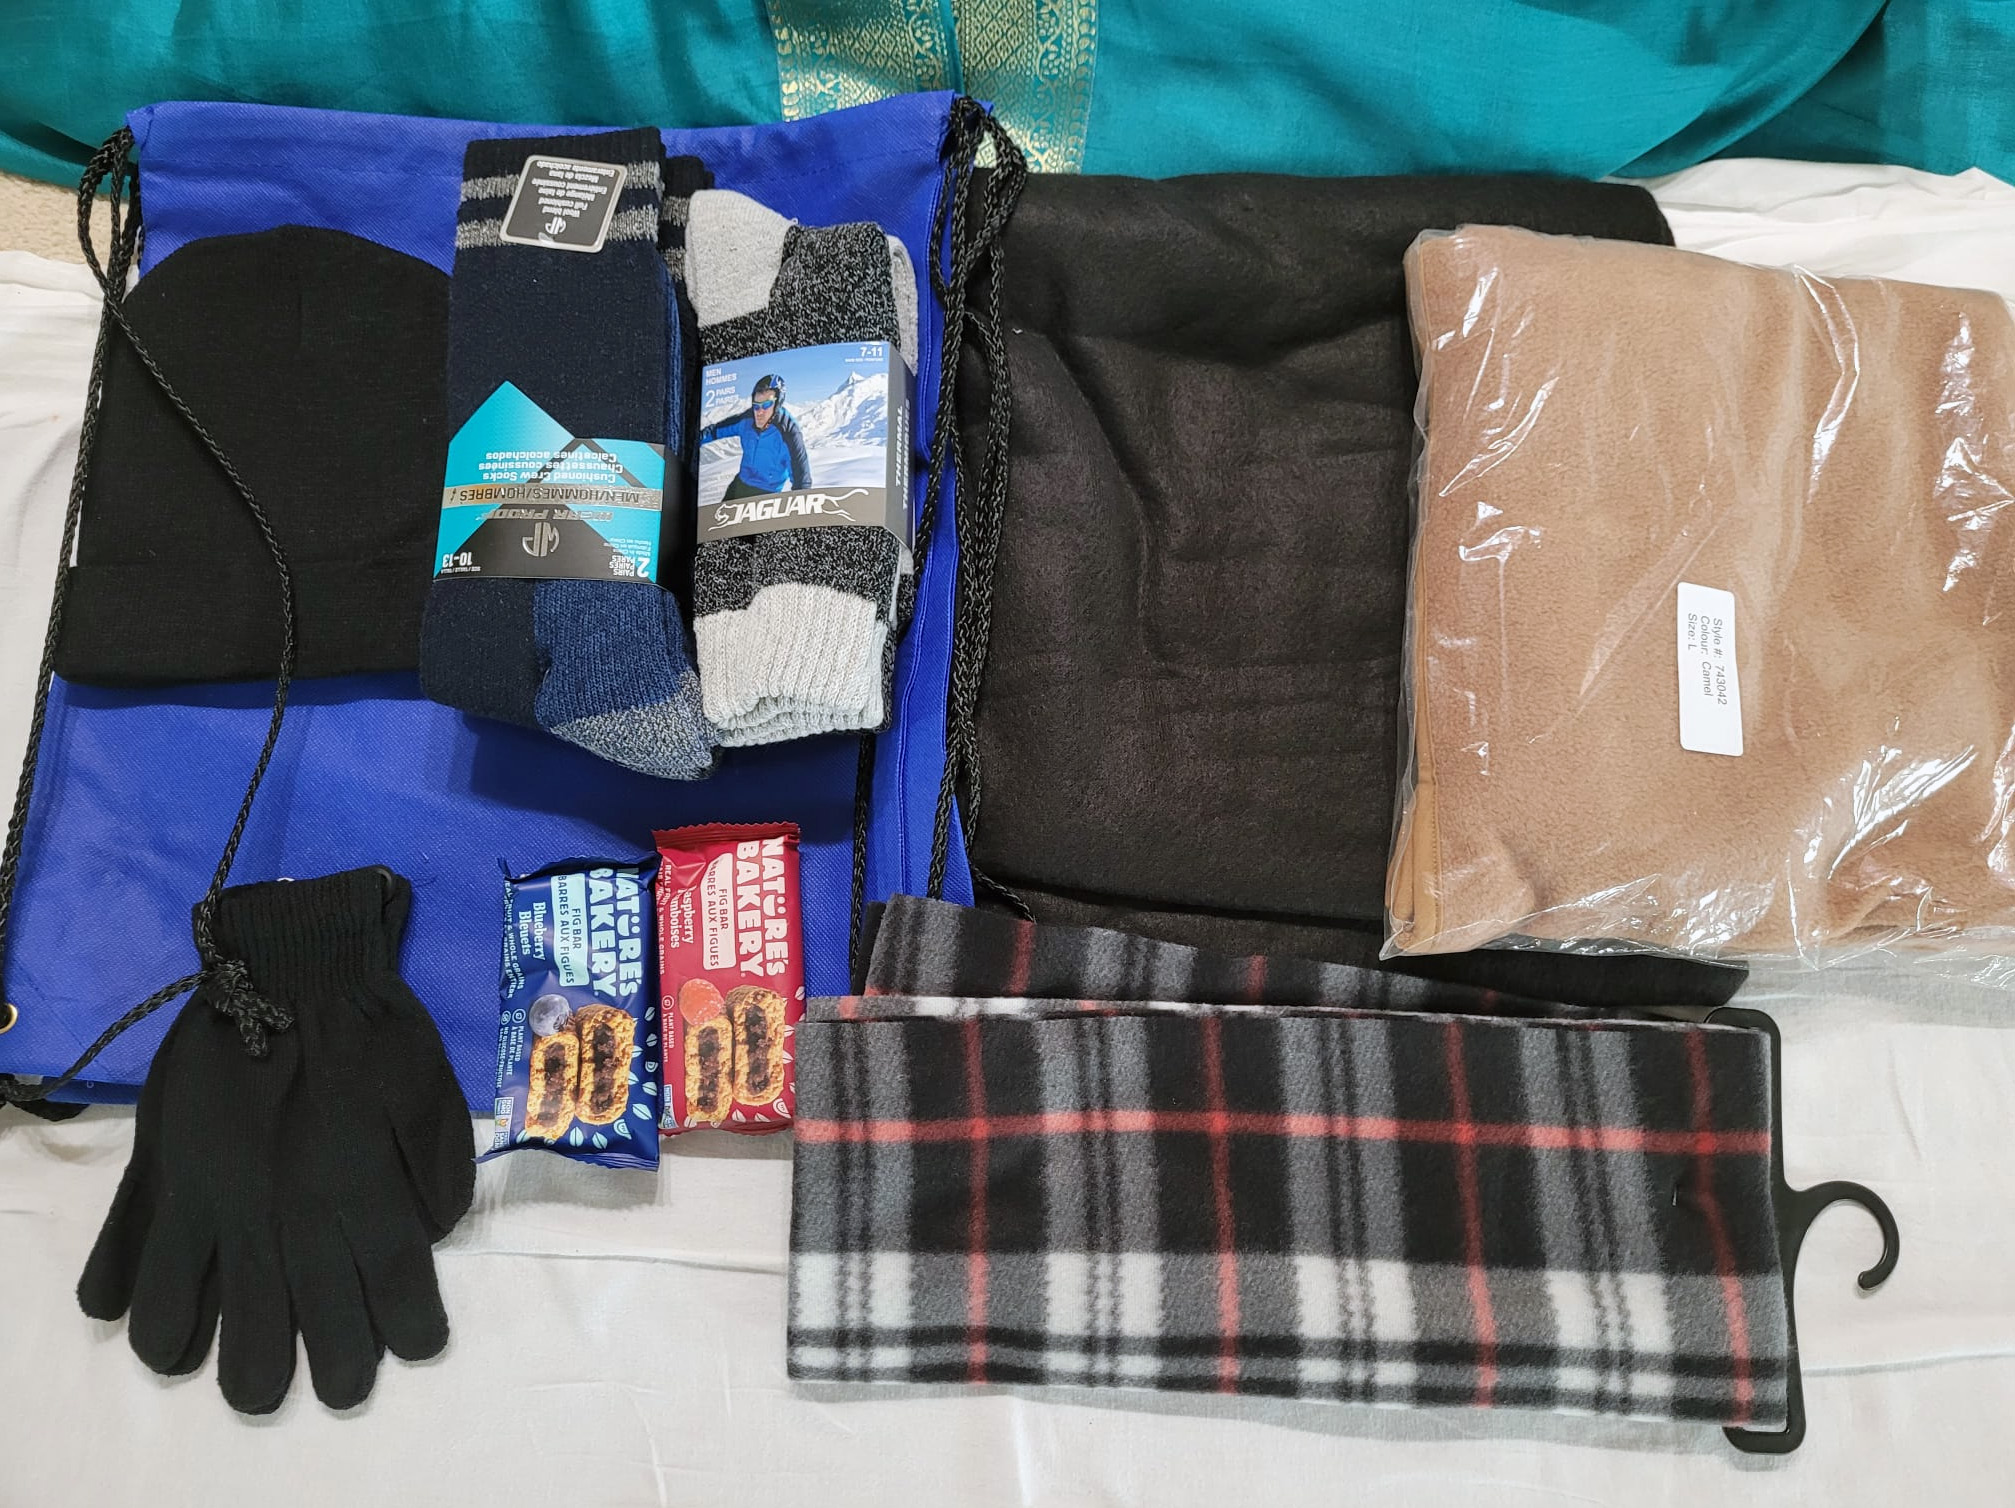 Assembled items for homeless care package: fig bag, gloves, toque, scarf, warm sock, tshirt, cinch bag